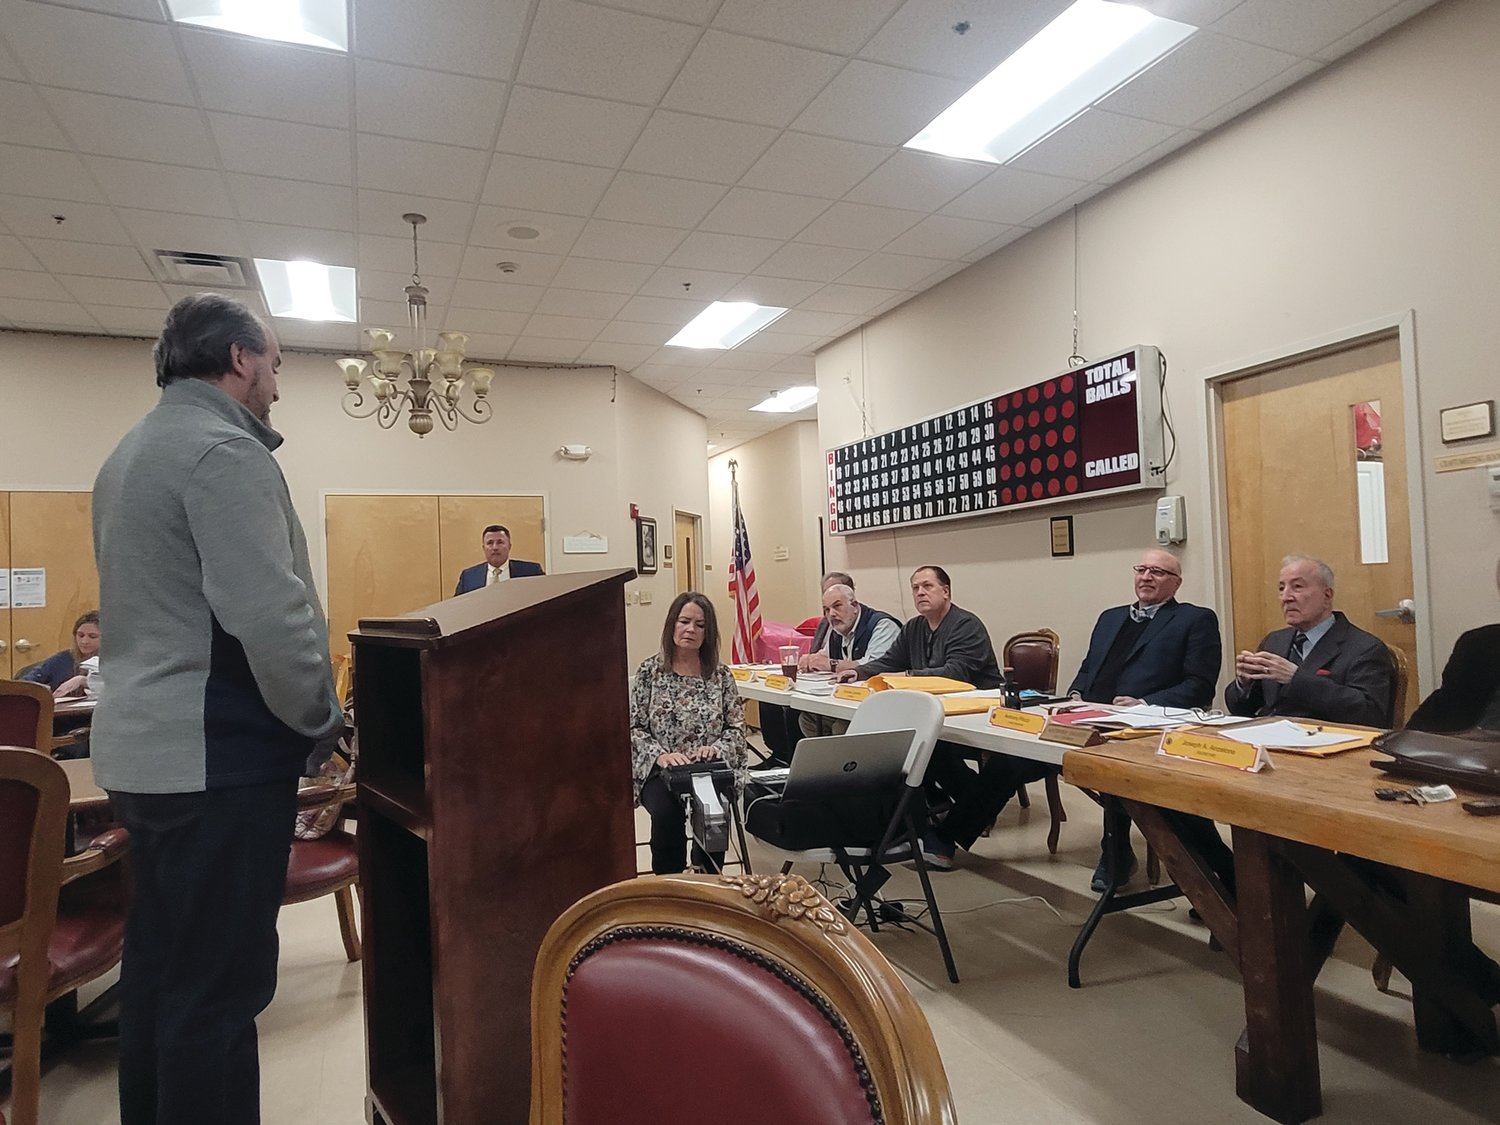 TOWN COUNCIL REP: Town Councilman Robert Civetti stood up from the crowd and asked to speak. He insisted the developers pay to notify every abutter of the project and future meetings, via certified mail.